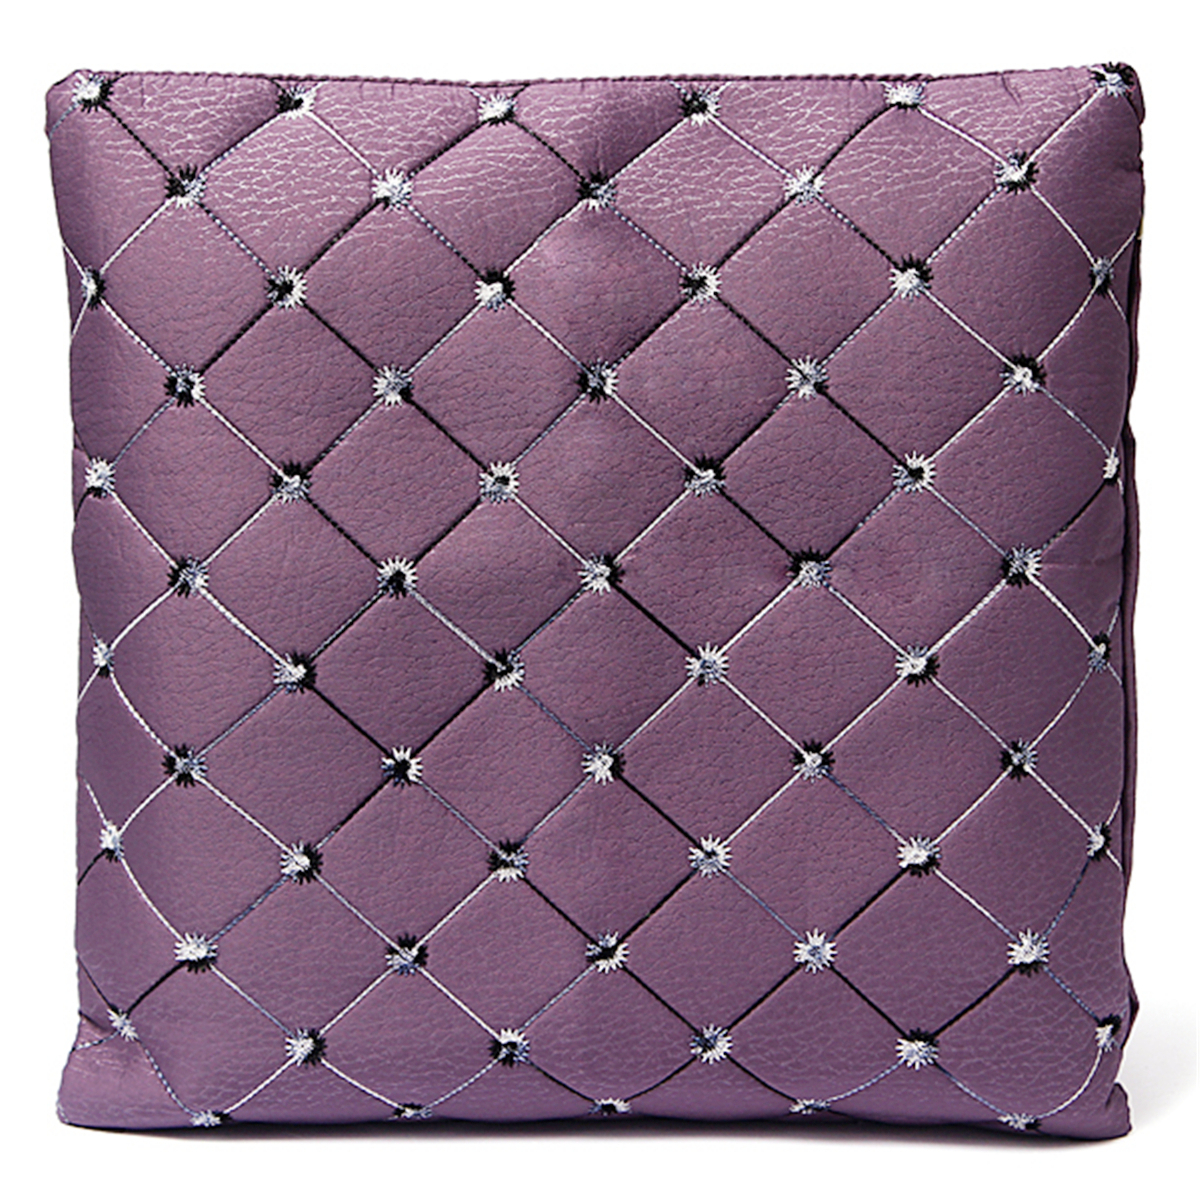 17-Square-Embroidered-Pillow-Case--Home-Decor-Grid-Waist-Throw-Cushion-Cover-1387986